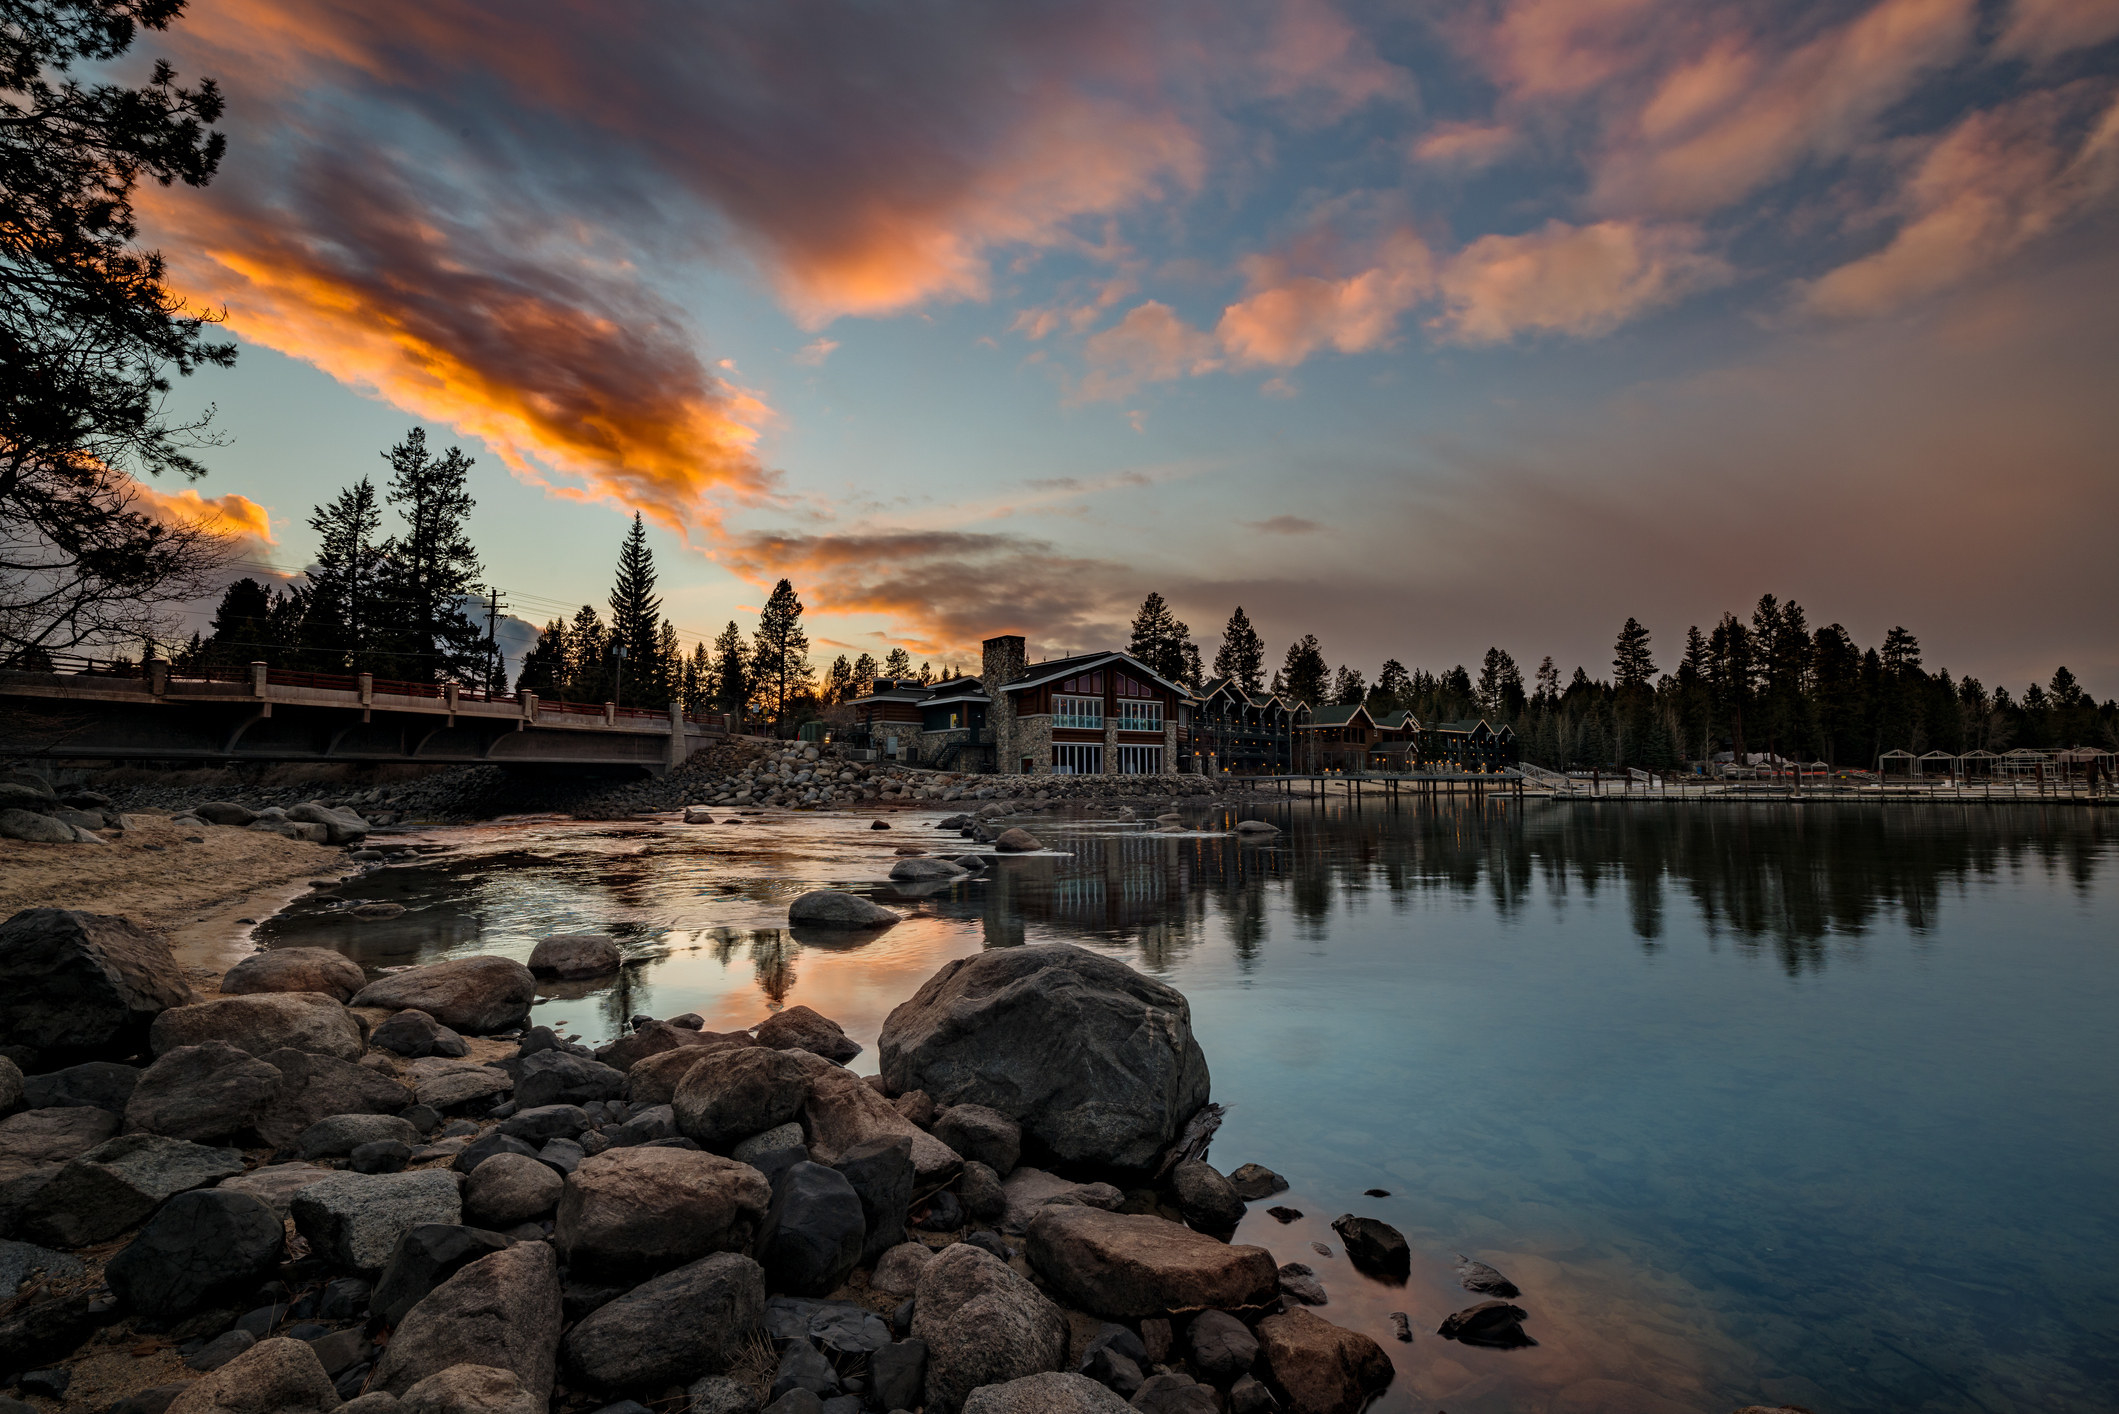 Sunset on Payette Lake with hotel and cloud reflections in the water shoreline